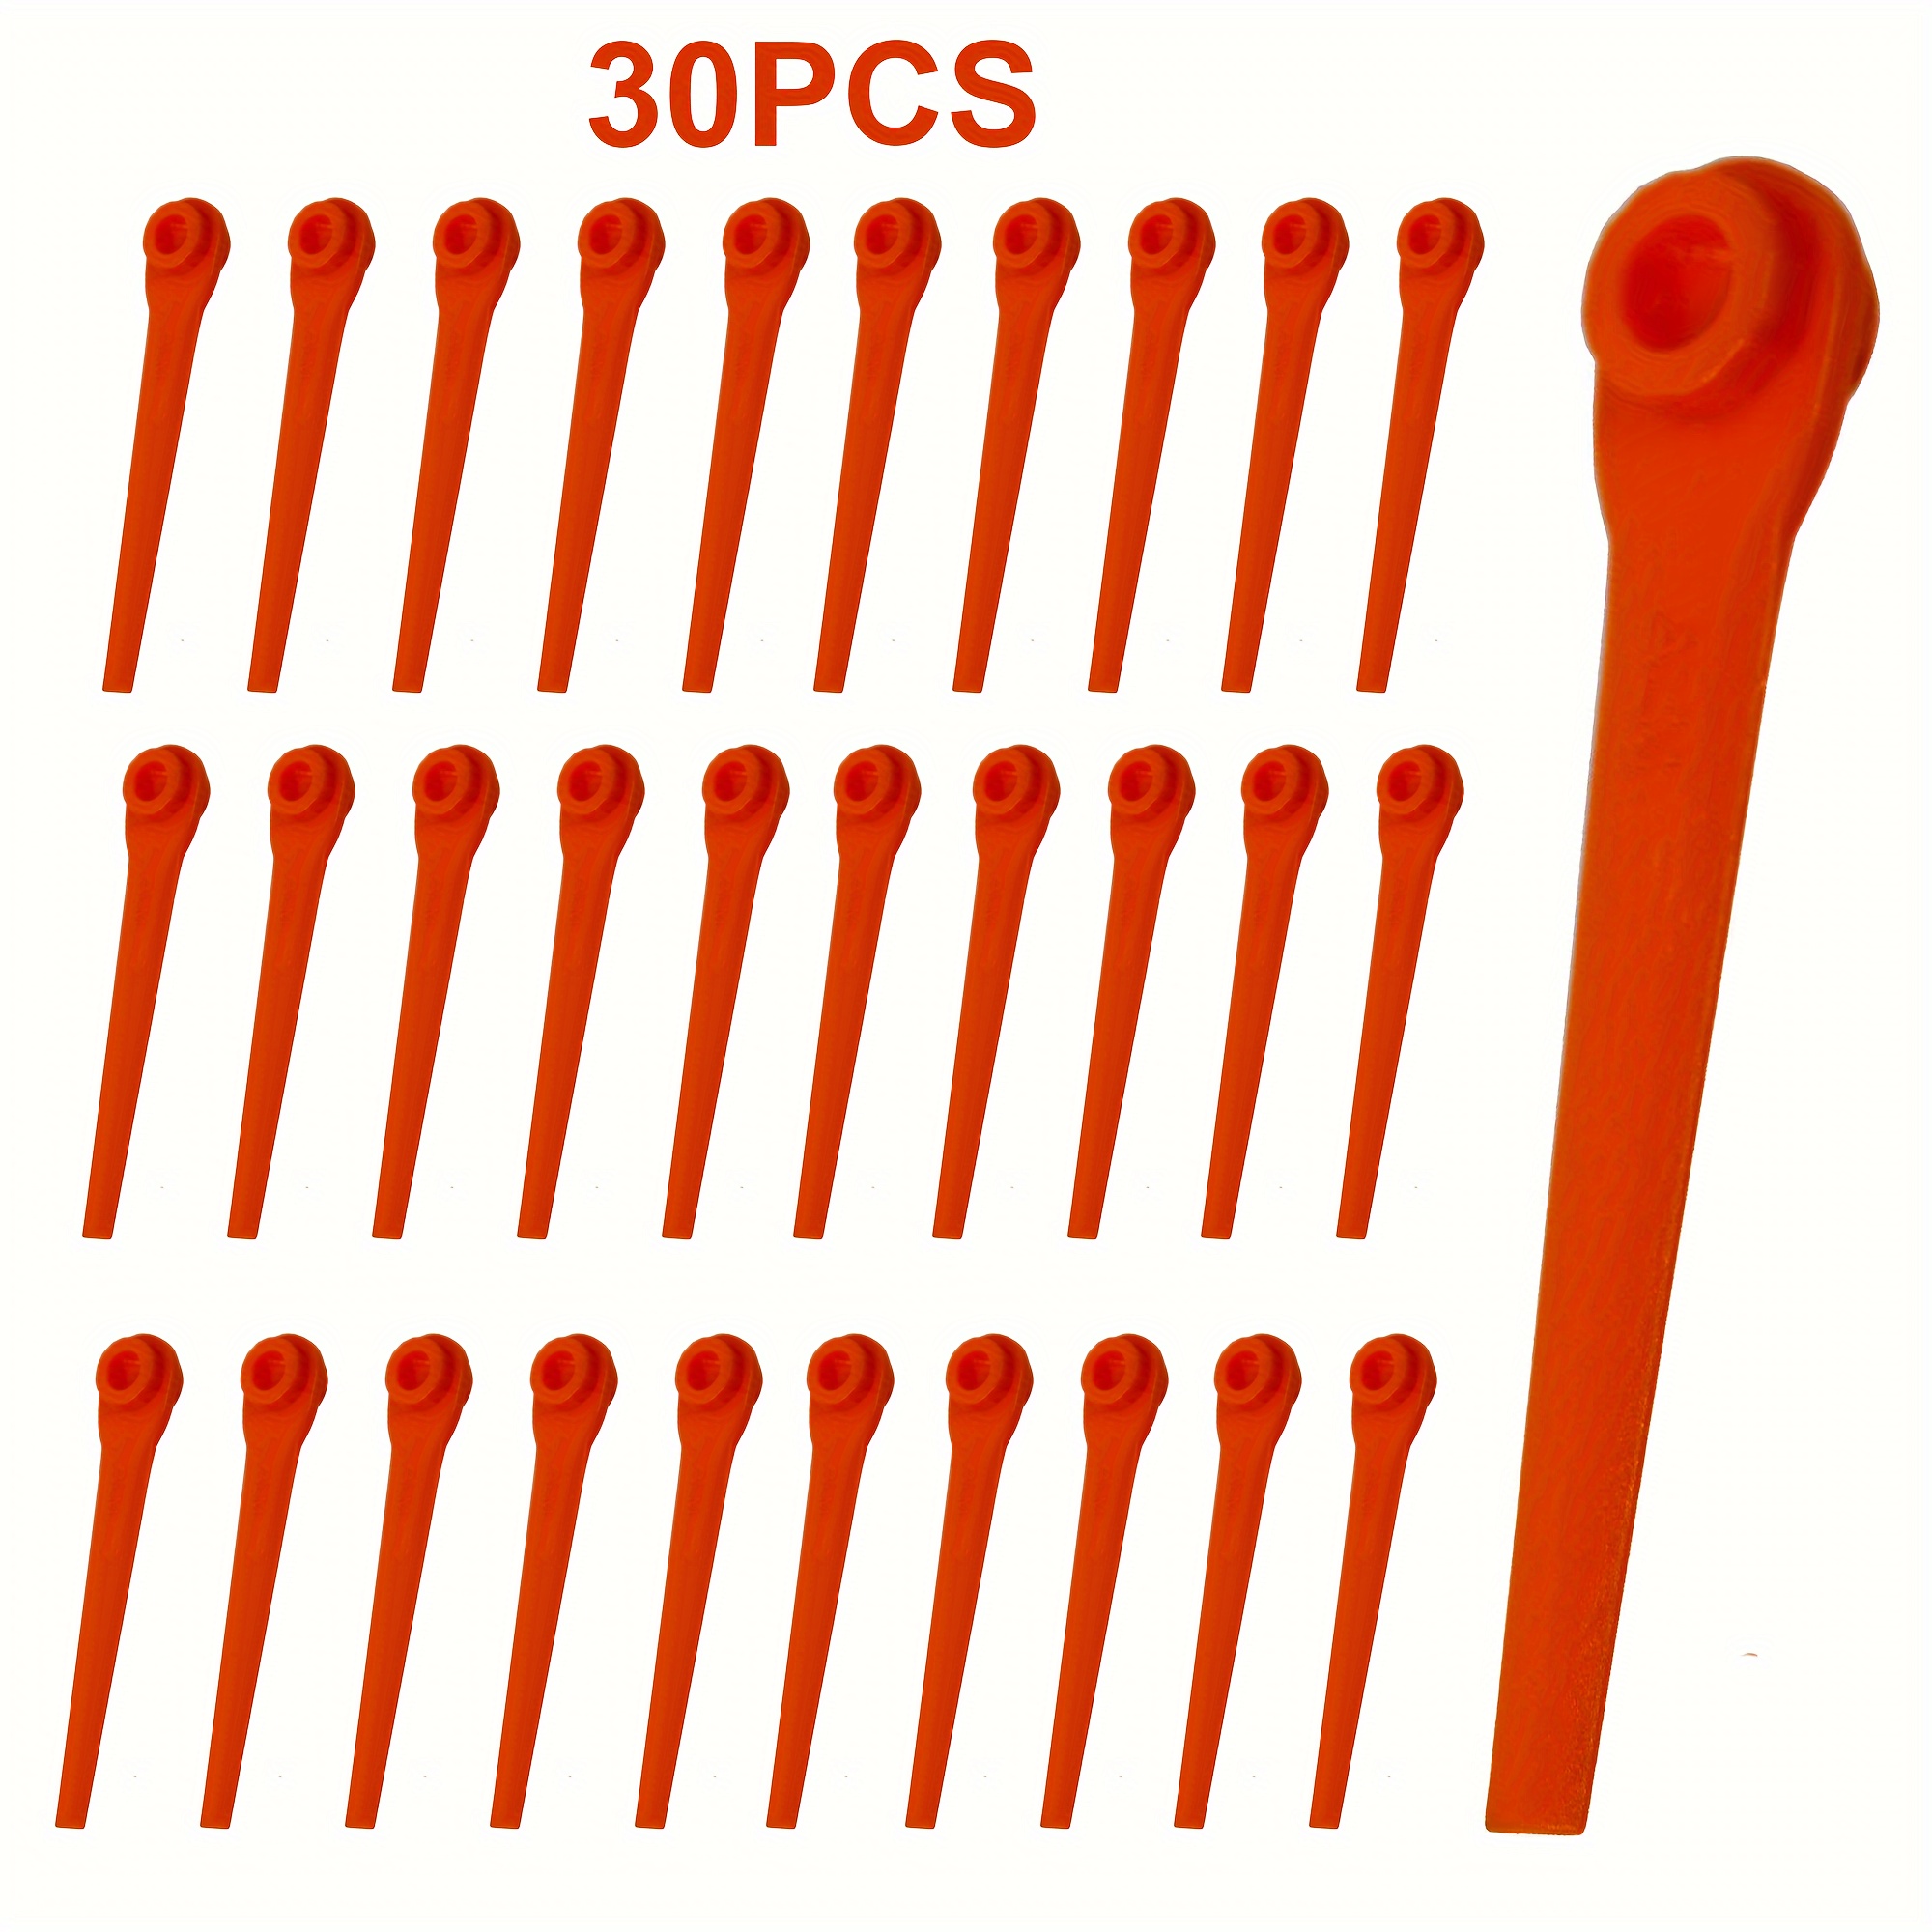 

30-piece L70 Hex Plastic Blades Set For Garden Lawn Mowers - Durable Replacement Trimming Accessories, Outdoor Power Equipment